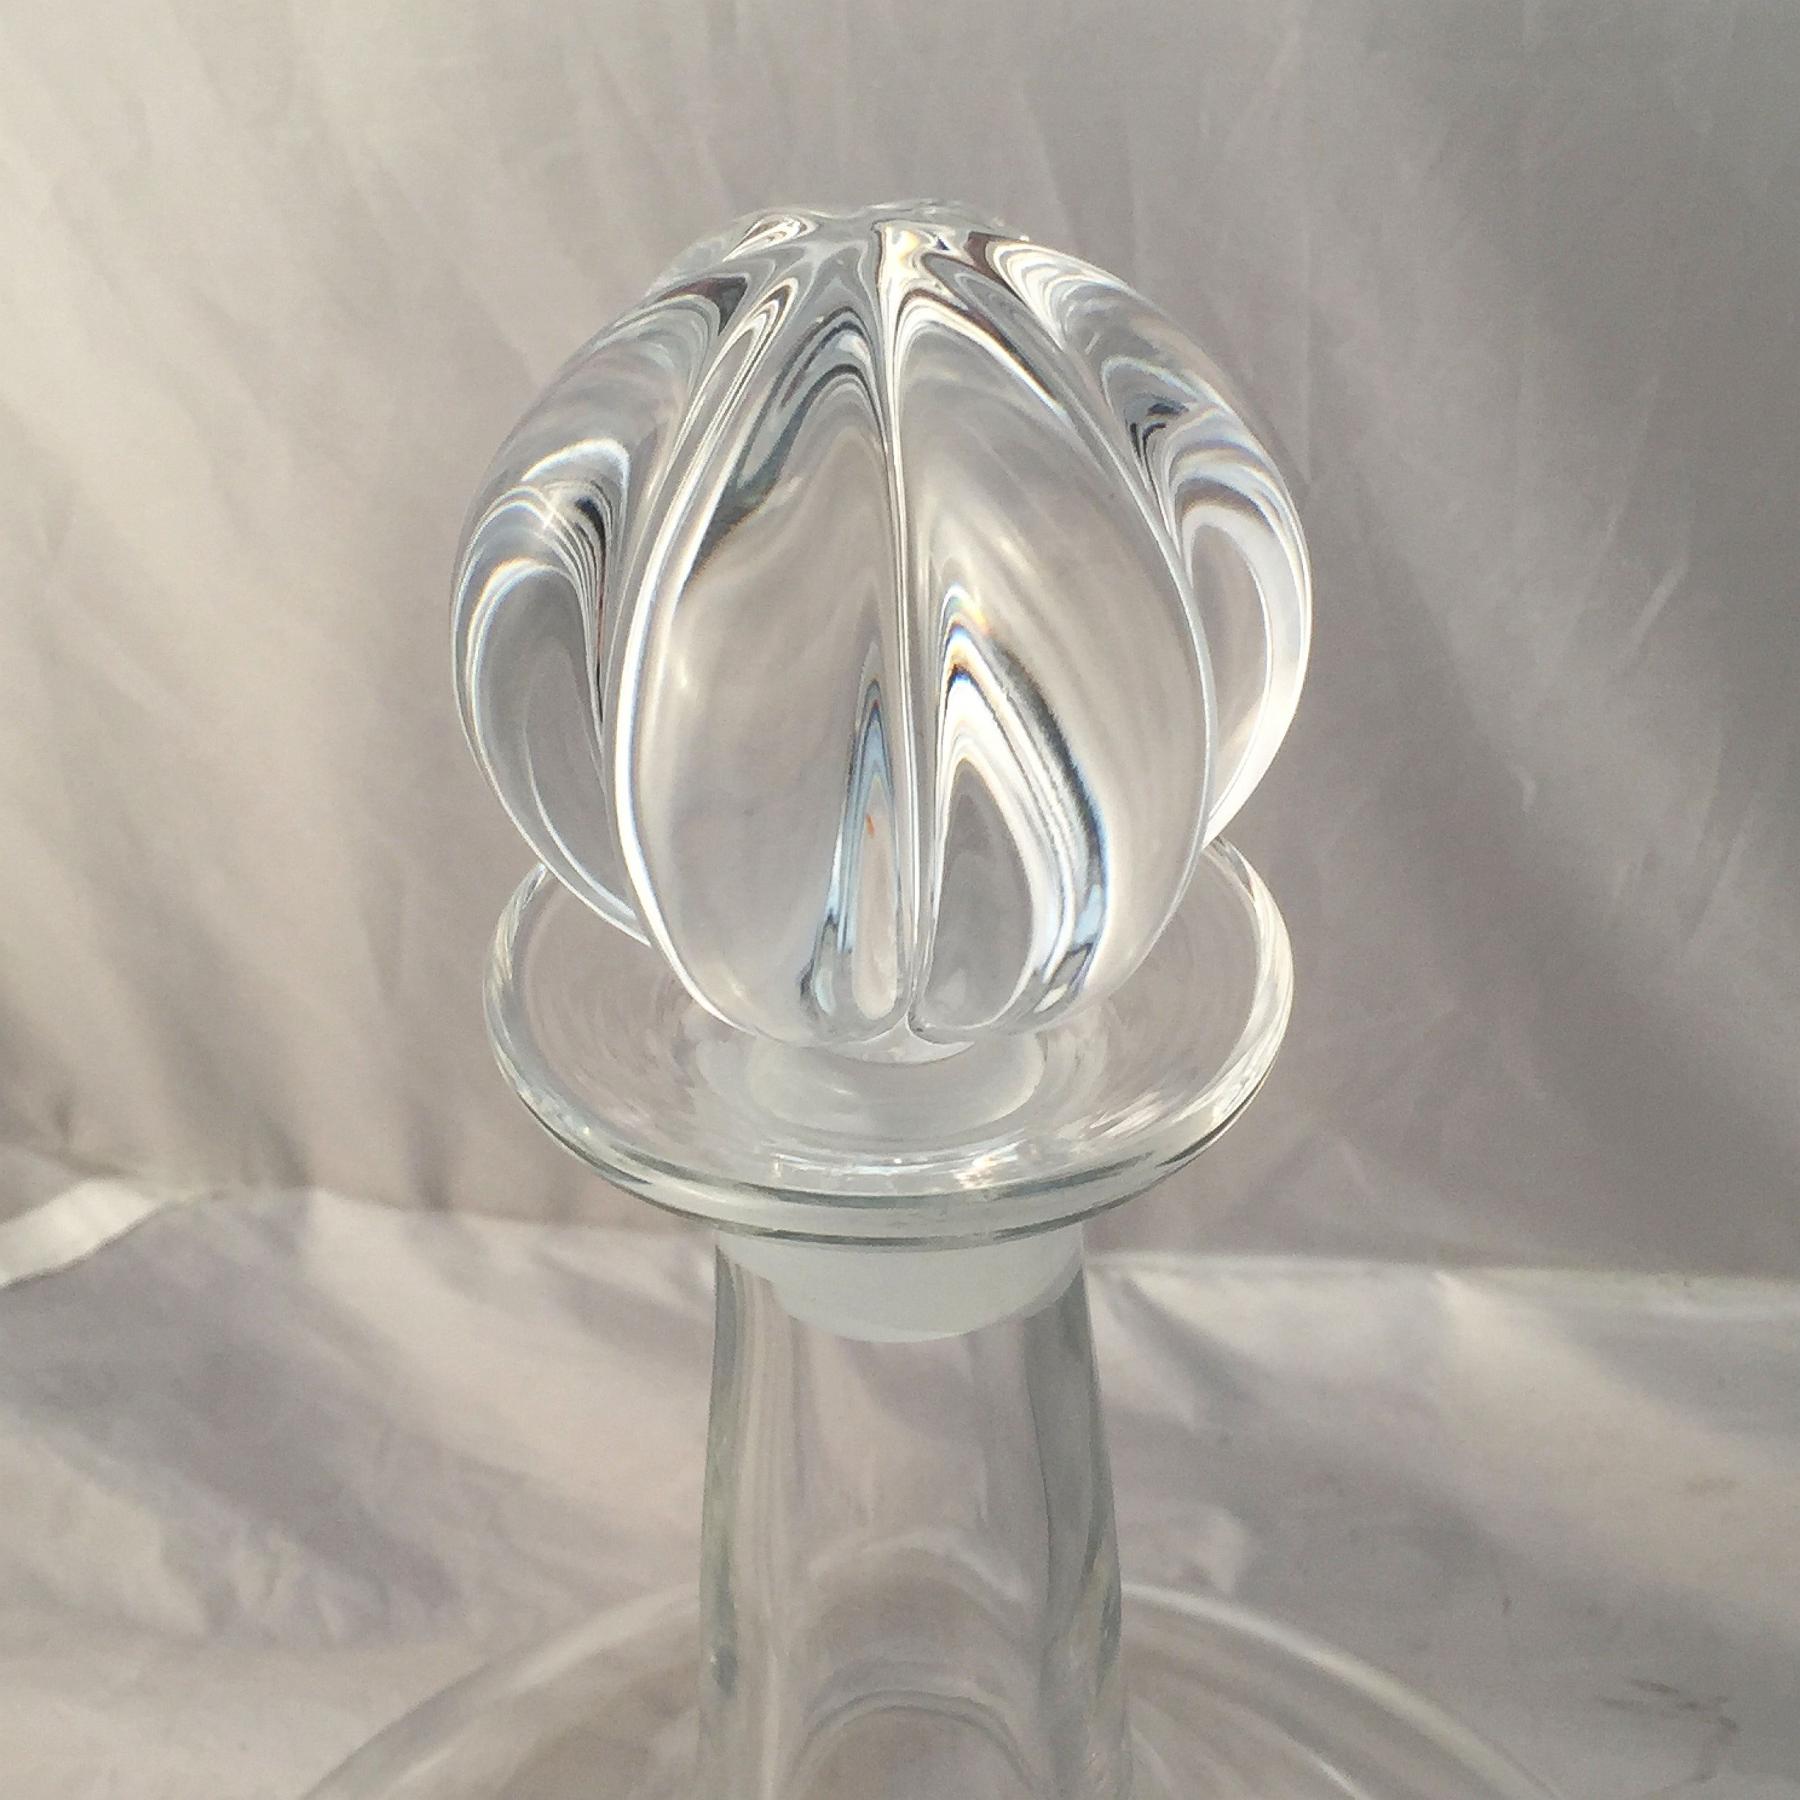 x1258_crystal_decanters_3